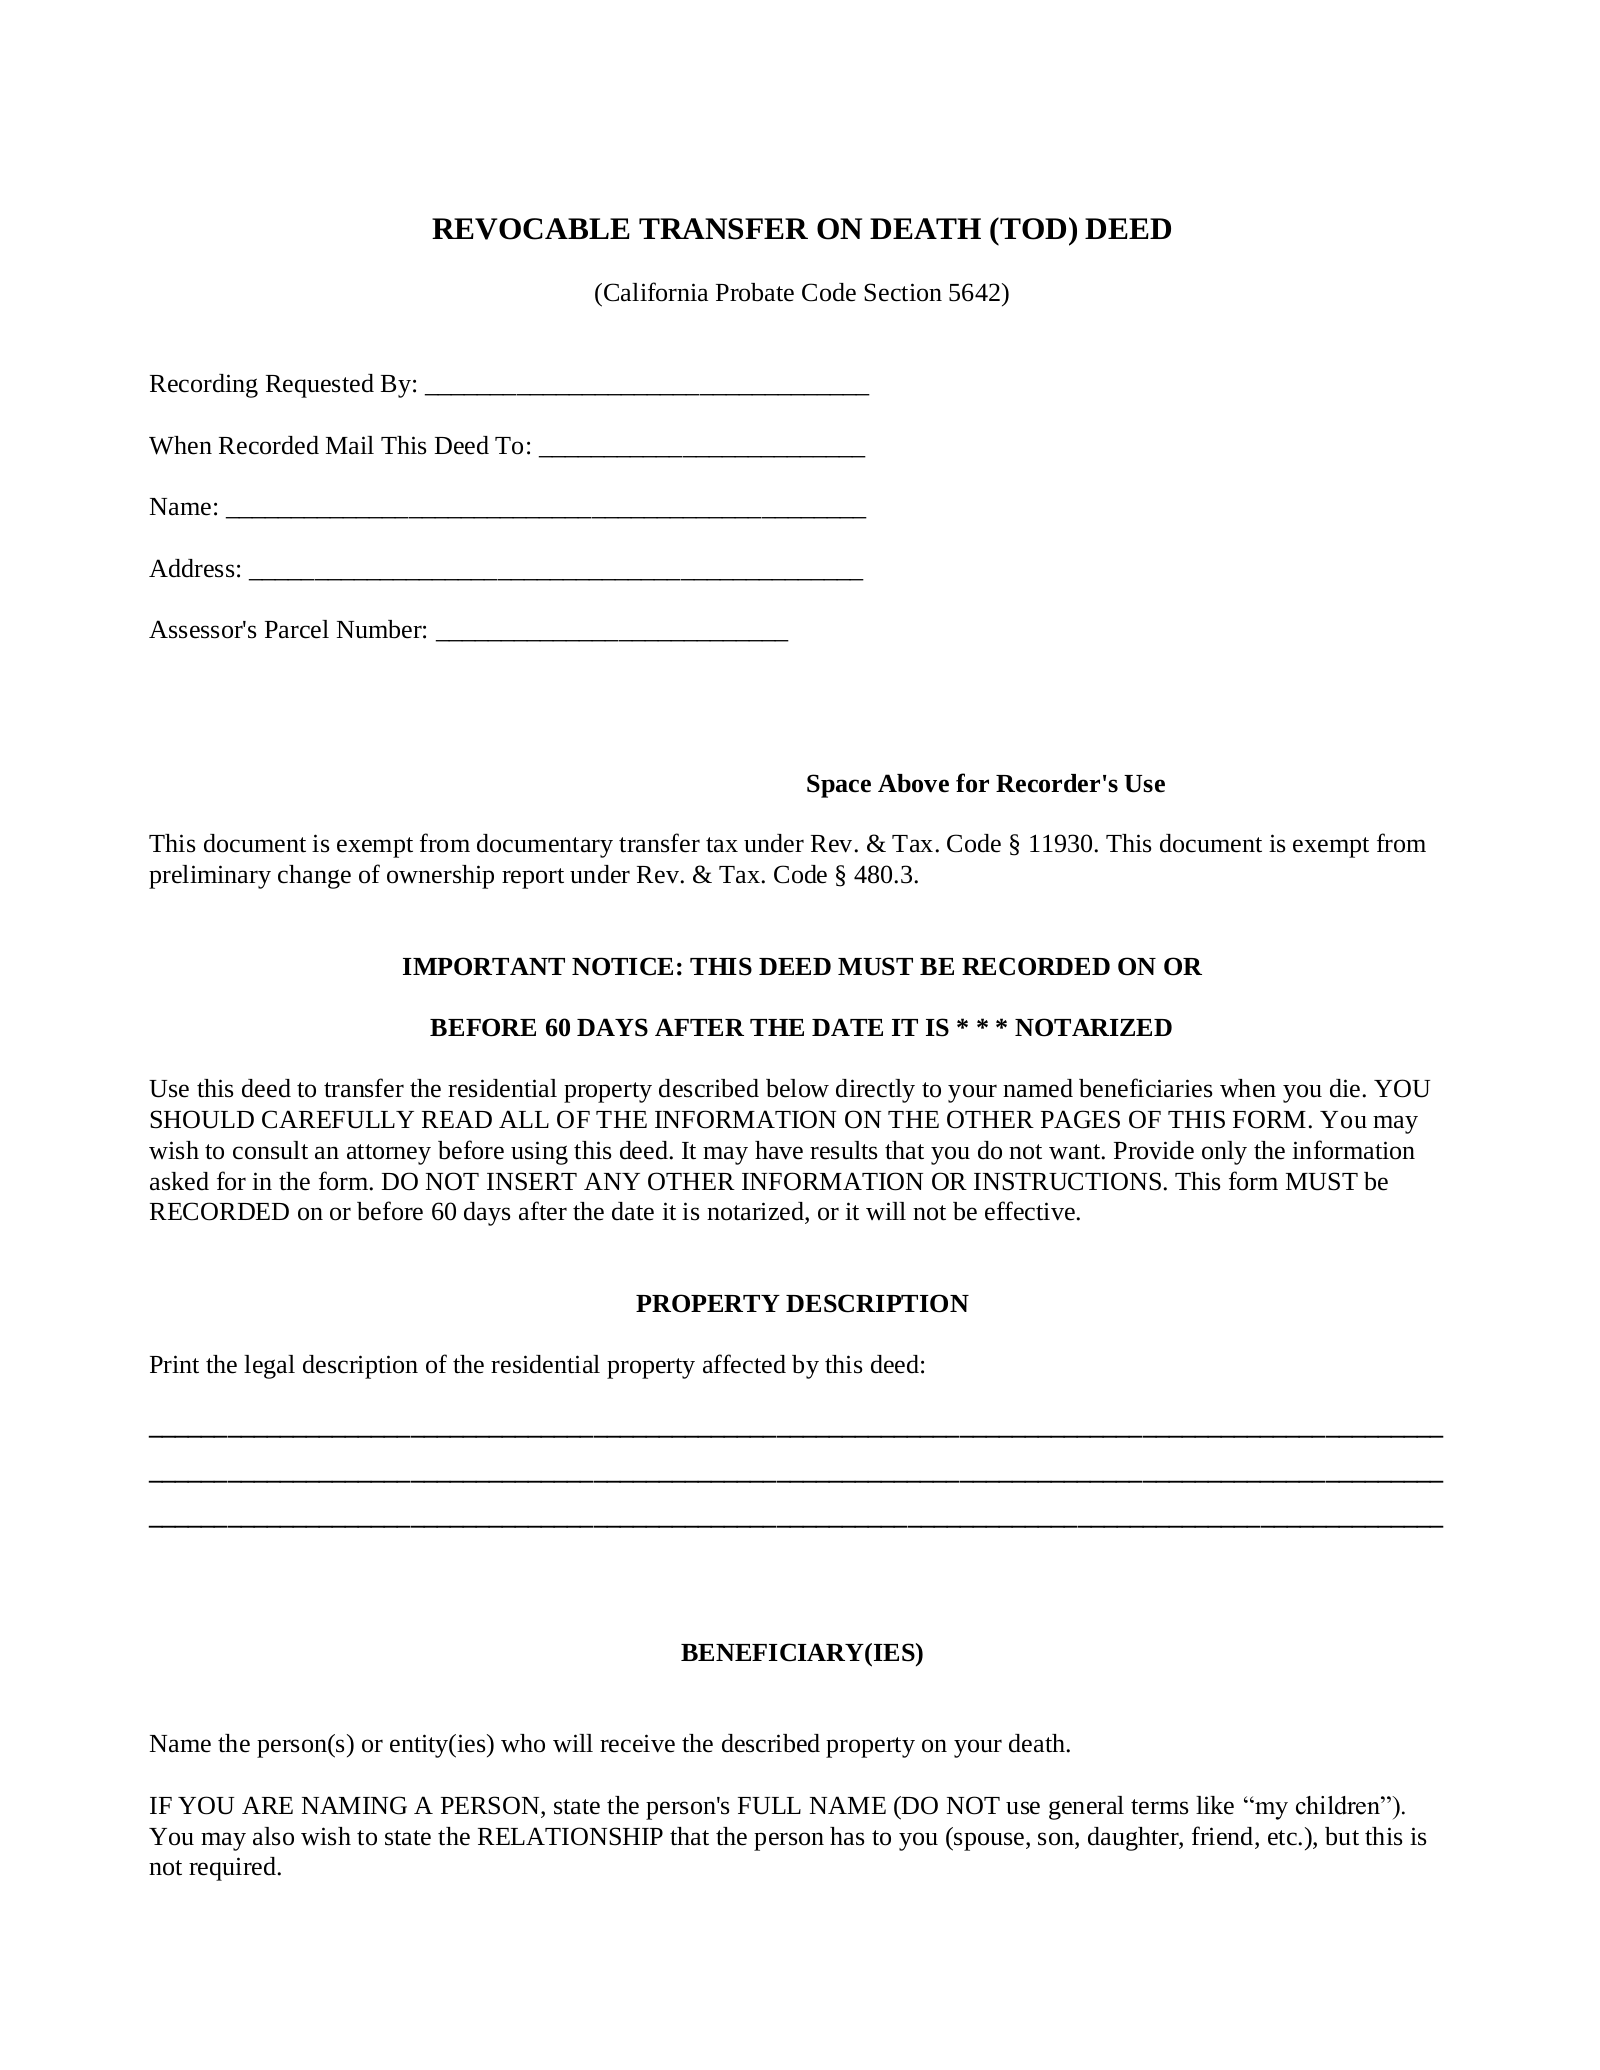 free-printable-transfer-of-real-property-form-printable-forms-free-online